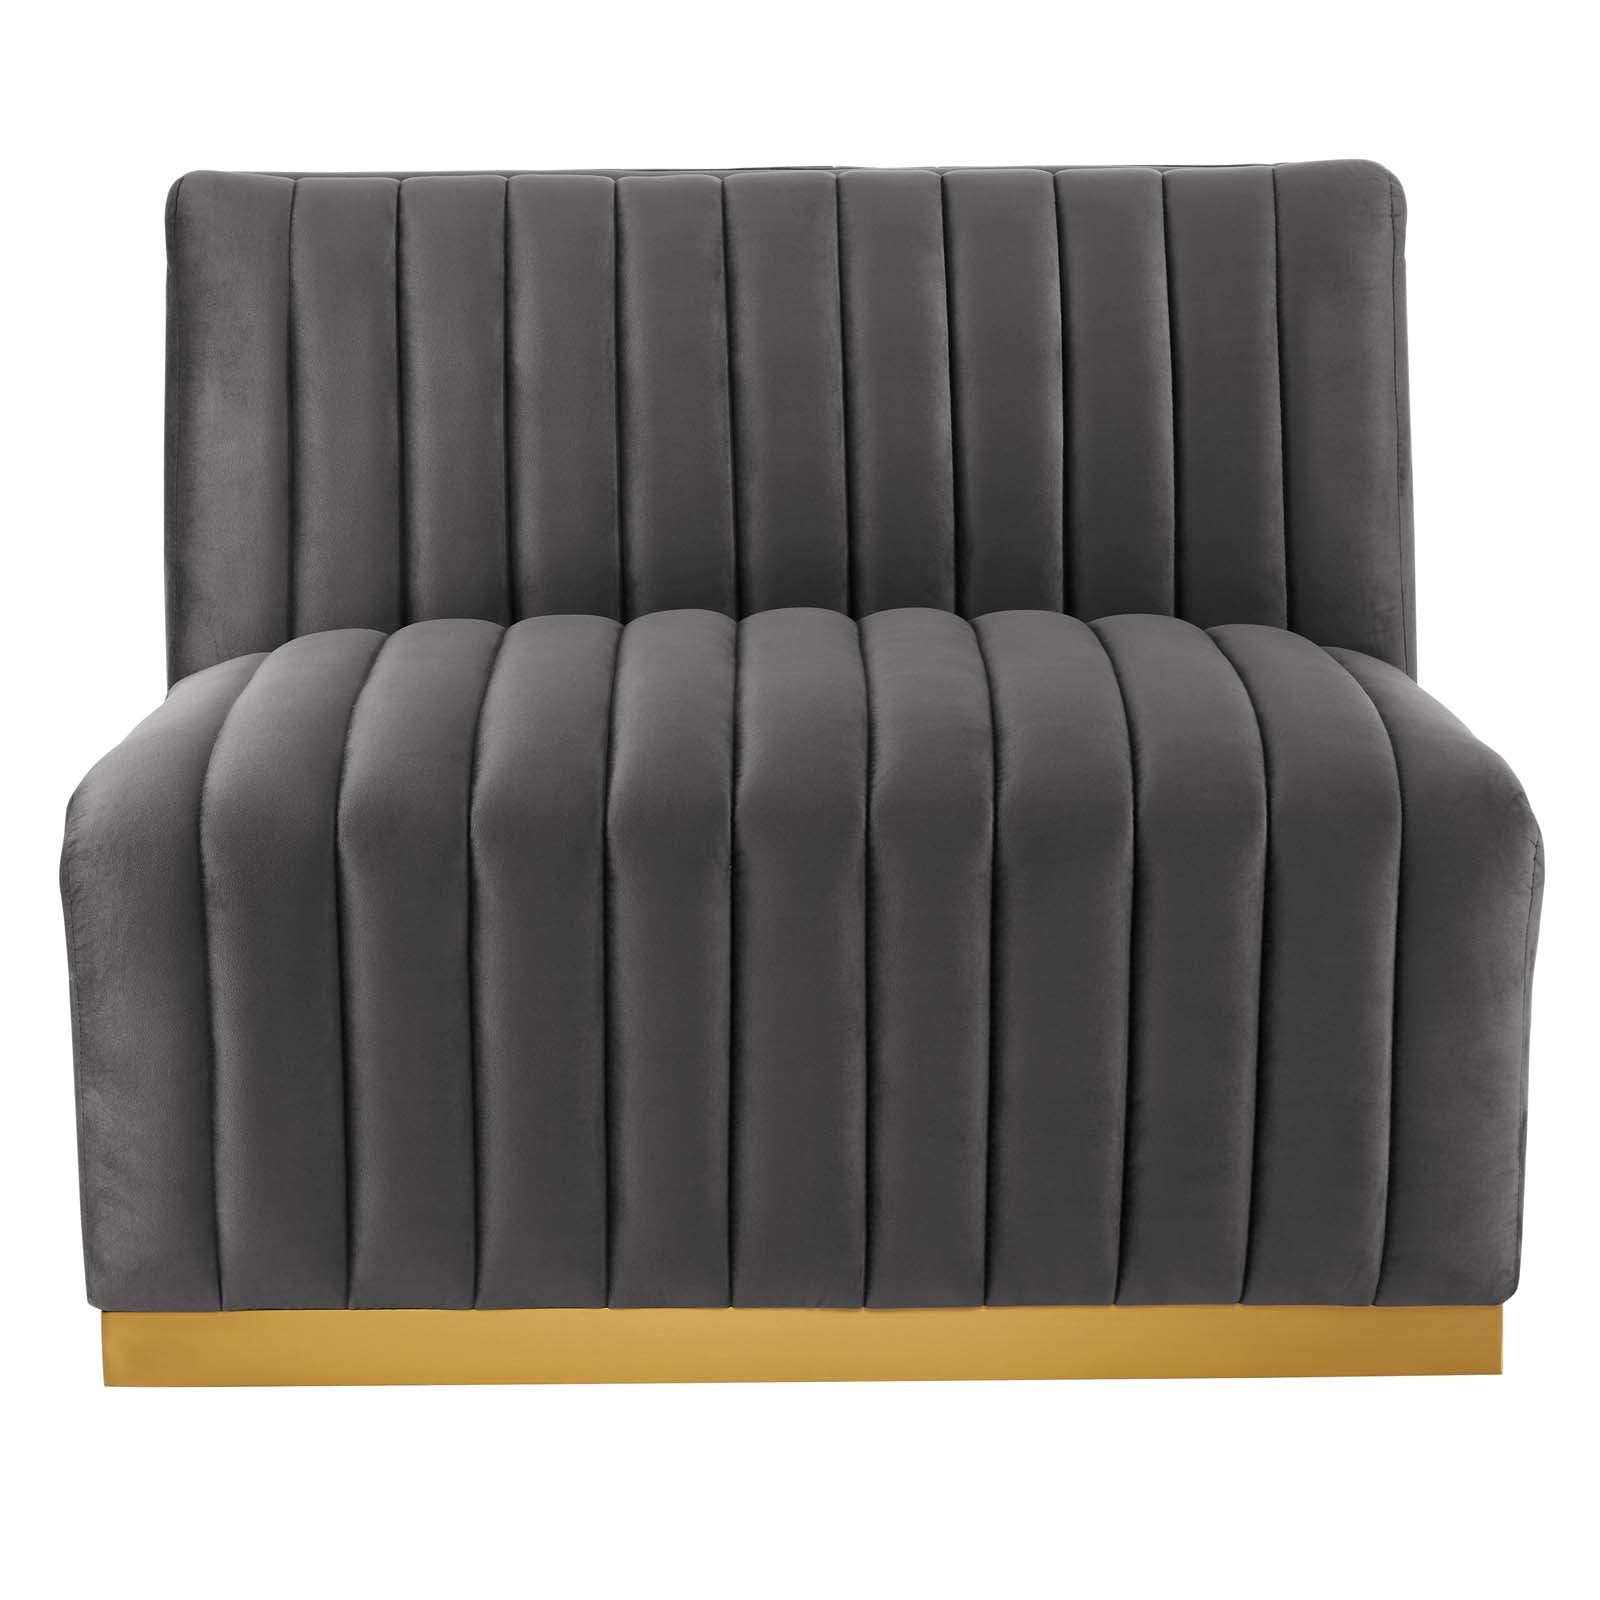 Modway Sectional Sofas - Conjure Channel Tufted Performance Velvet 5 Piece Sectional Sofa Gold Gray